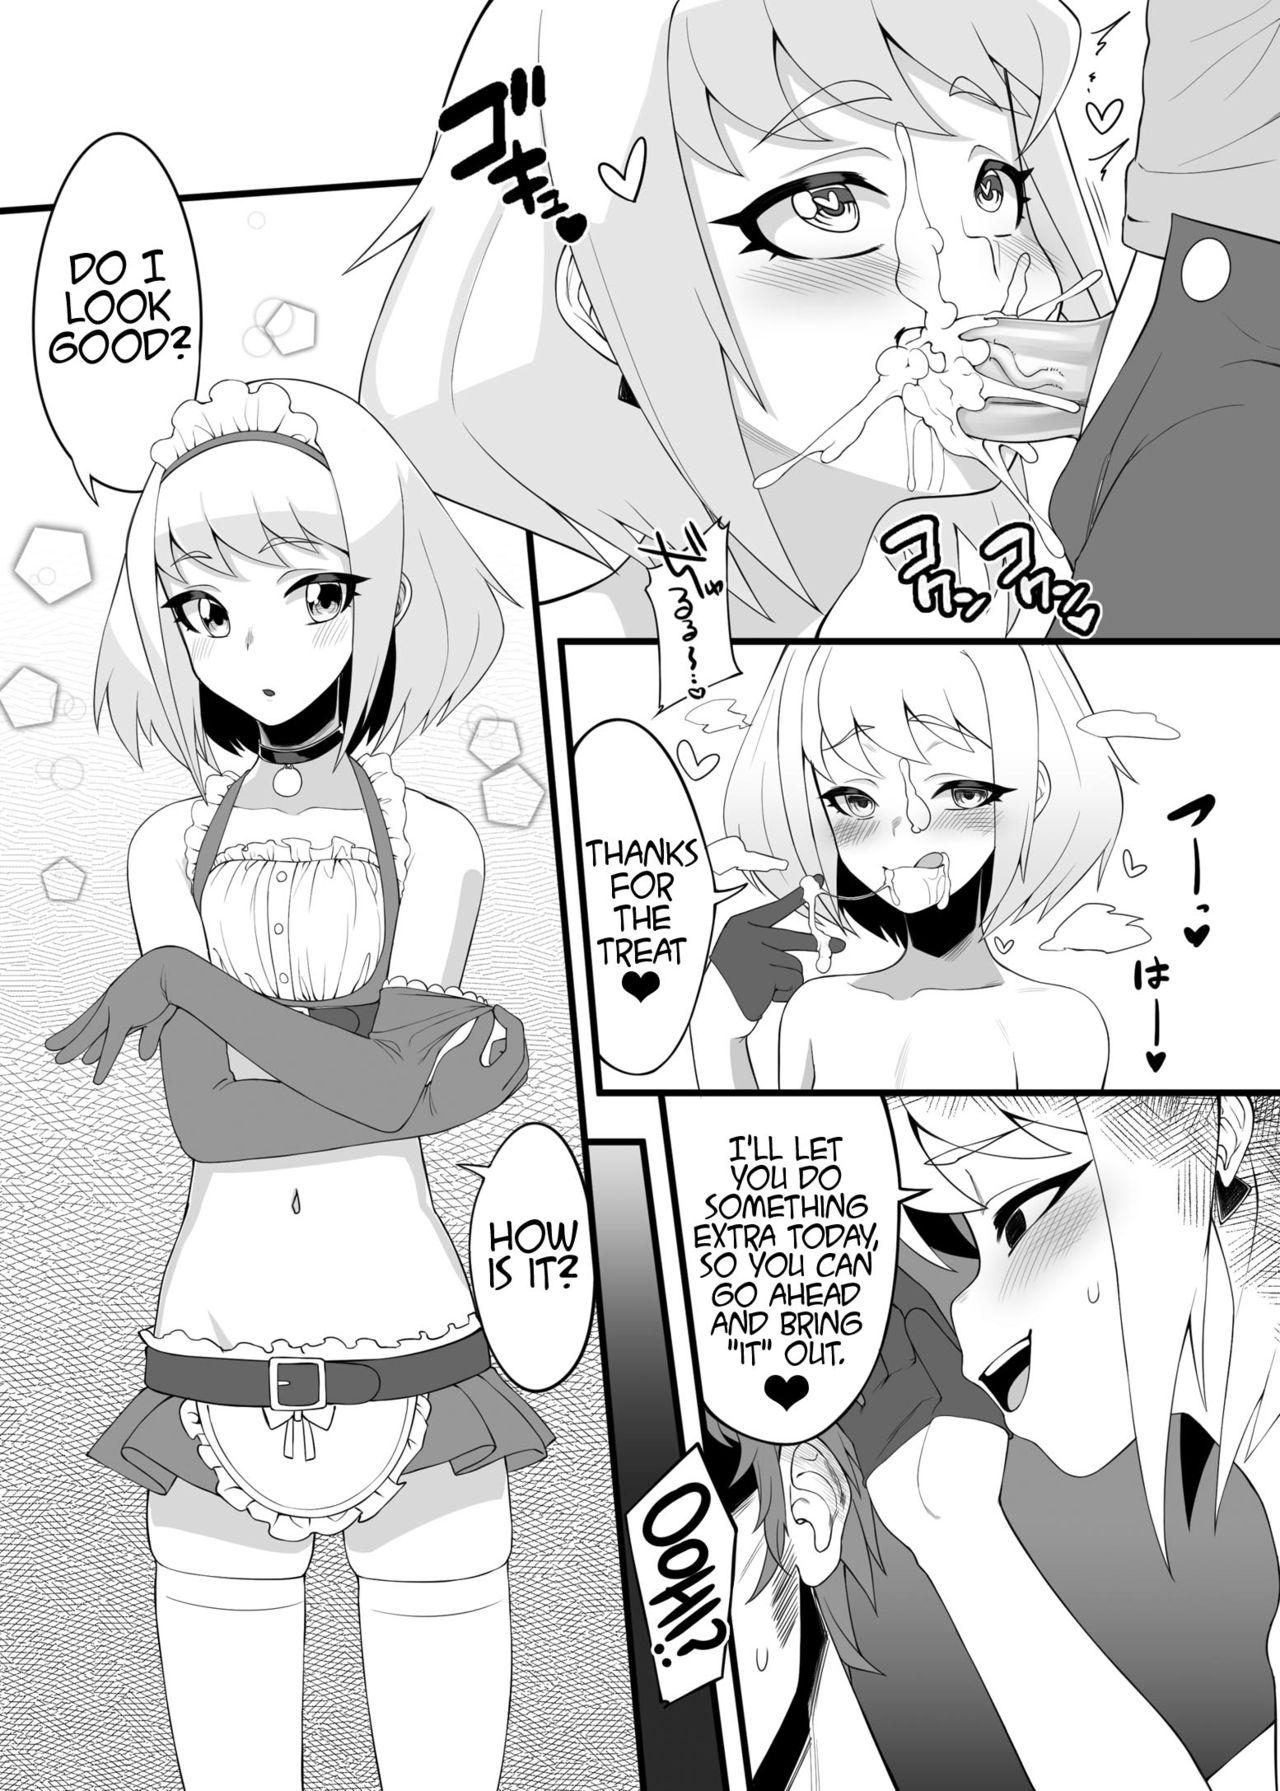 Teen Porn Managing the Sexual Frustrations of the Burning Rescue | Ranshaozhemen de Xingyu Chuli - Promare Tamil - Page 8